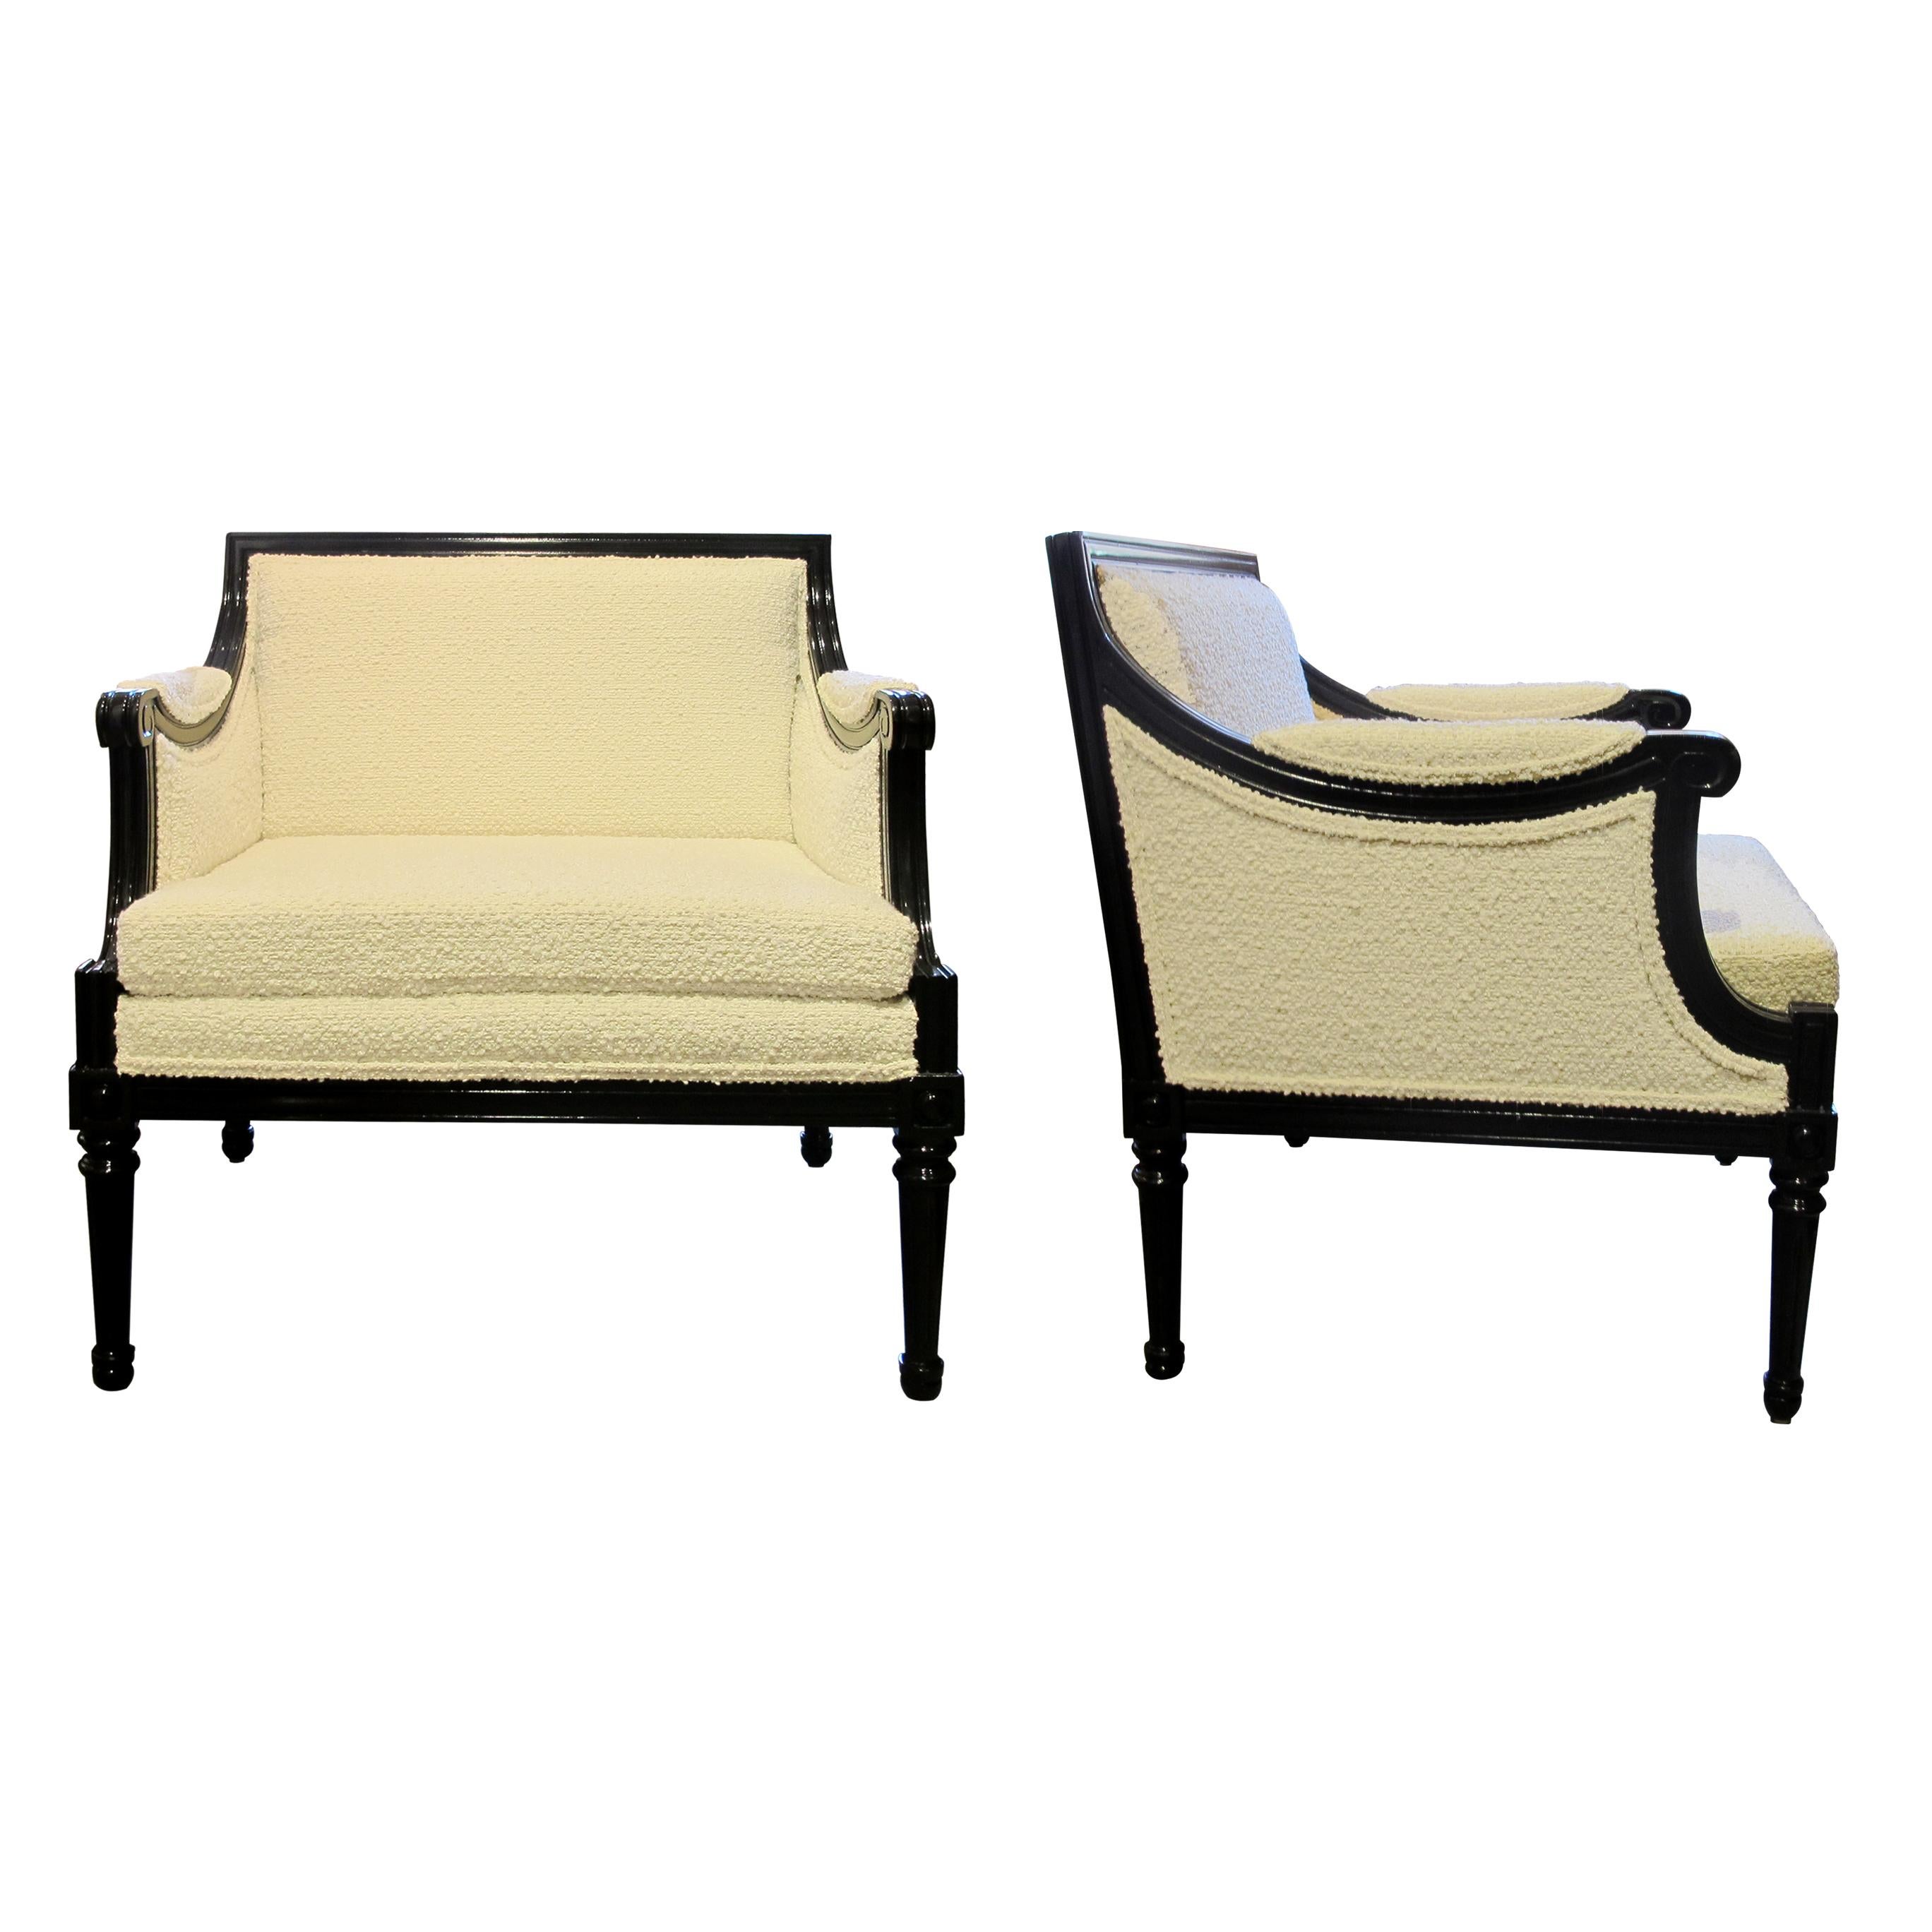 These comfortable tub square armchairs are a classic Swedish design from the 1960s. They have been reupholstered in a light cream bouclé fabric and the walnut frames have been lacquered to a black semi-gloss finish which gives them a fresh and